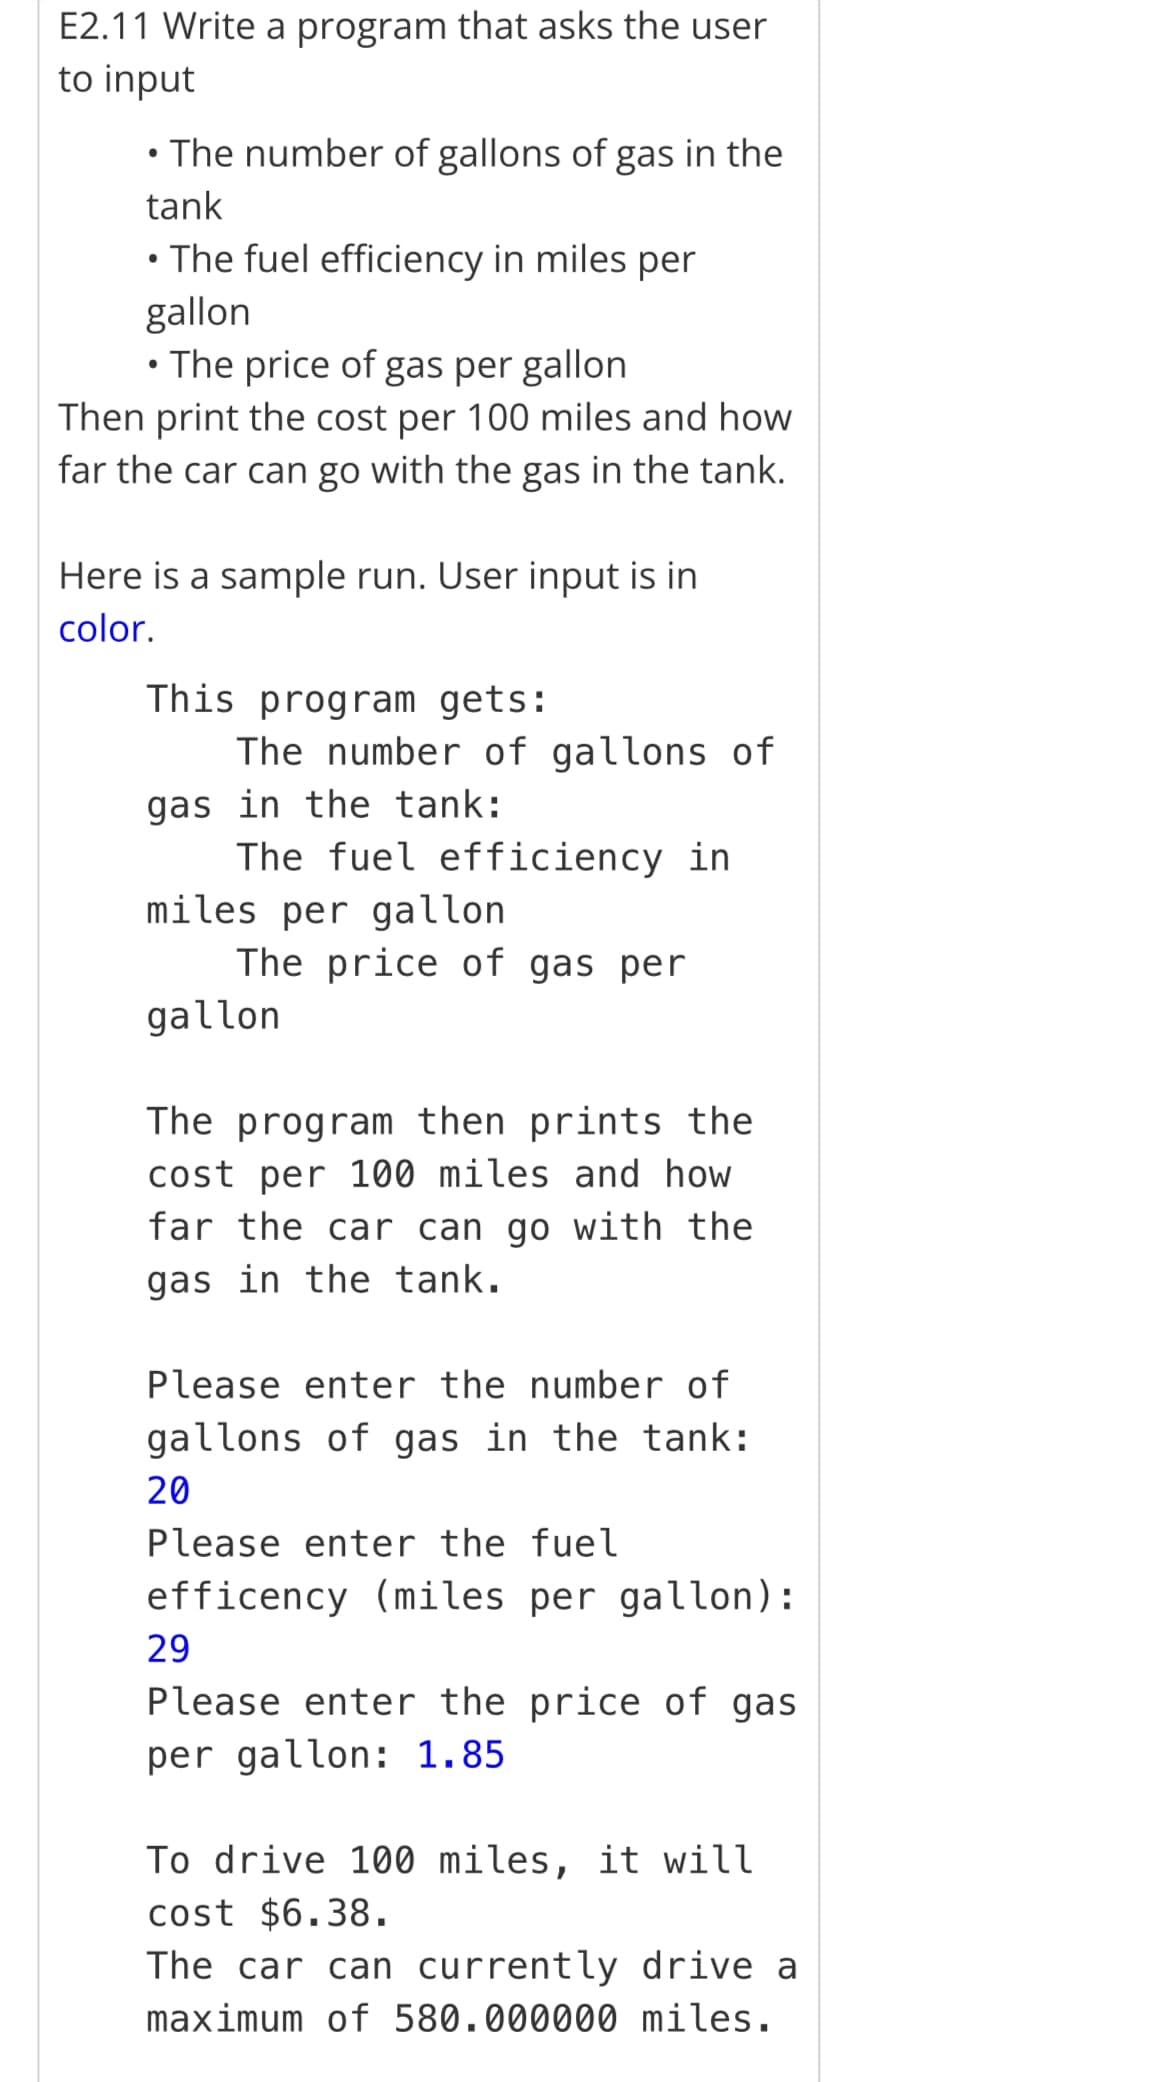 E2.11 Write a program that asks the user
to input
• The number of gallons of gas in the
tank
• The fuel efficiency in miles per
gallon
• The price of gas per gallon
Then print the cost per 100 miles and how
far the car can go with the gas in the tank.
Here is a sample run. User input is in
color.
This program gets:
The number of gallons of
gas in the tank:
The fuel efficiency in
miles per gallon
The price of gas per
gallon
The program then prints the
cost per 100 miles and how
far the car can go with the
gas in the tank.
Please enter the number of
gallons of gas in the tank:
20
Please enter the fuel
efficency (miles per gallon):
29
Please enter the price of gas
per gallon: 1.85
To drive 100 miles, it will
cost $6.38.
The car can currently drive a
maximum of 580.000000 miles.